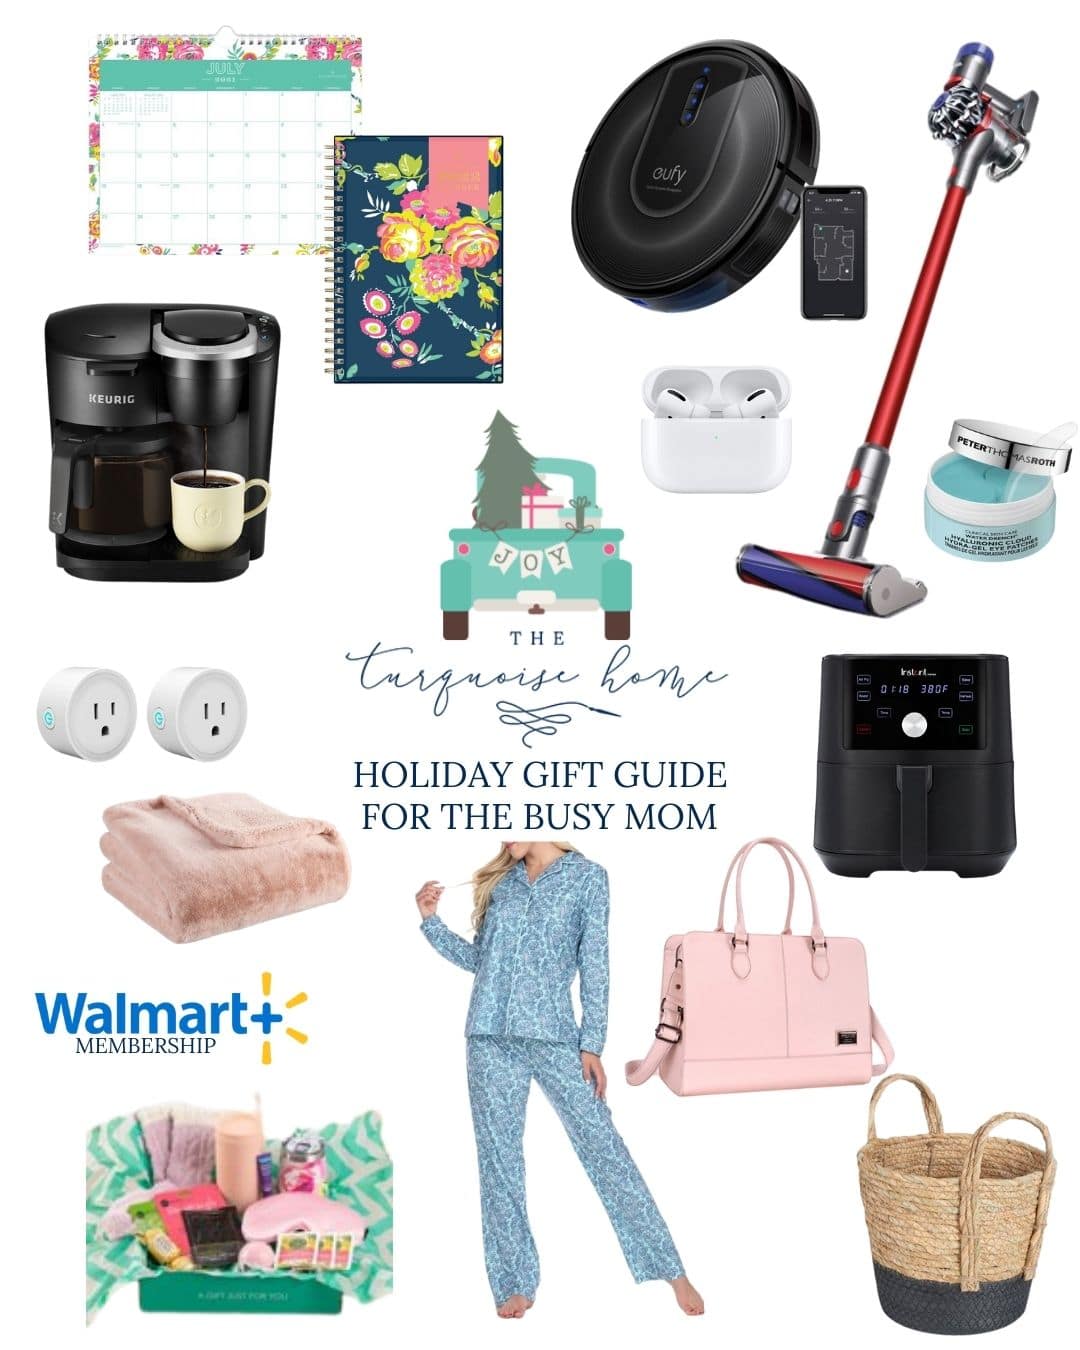 https://theturquoisehome.com/wp-content/uploads/2020/11/Gift-Guide-for-Busy-Mom-IG.jpg